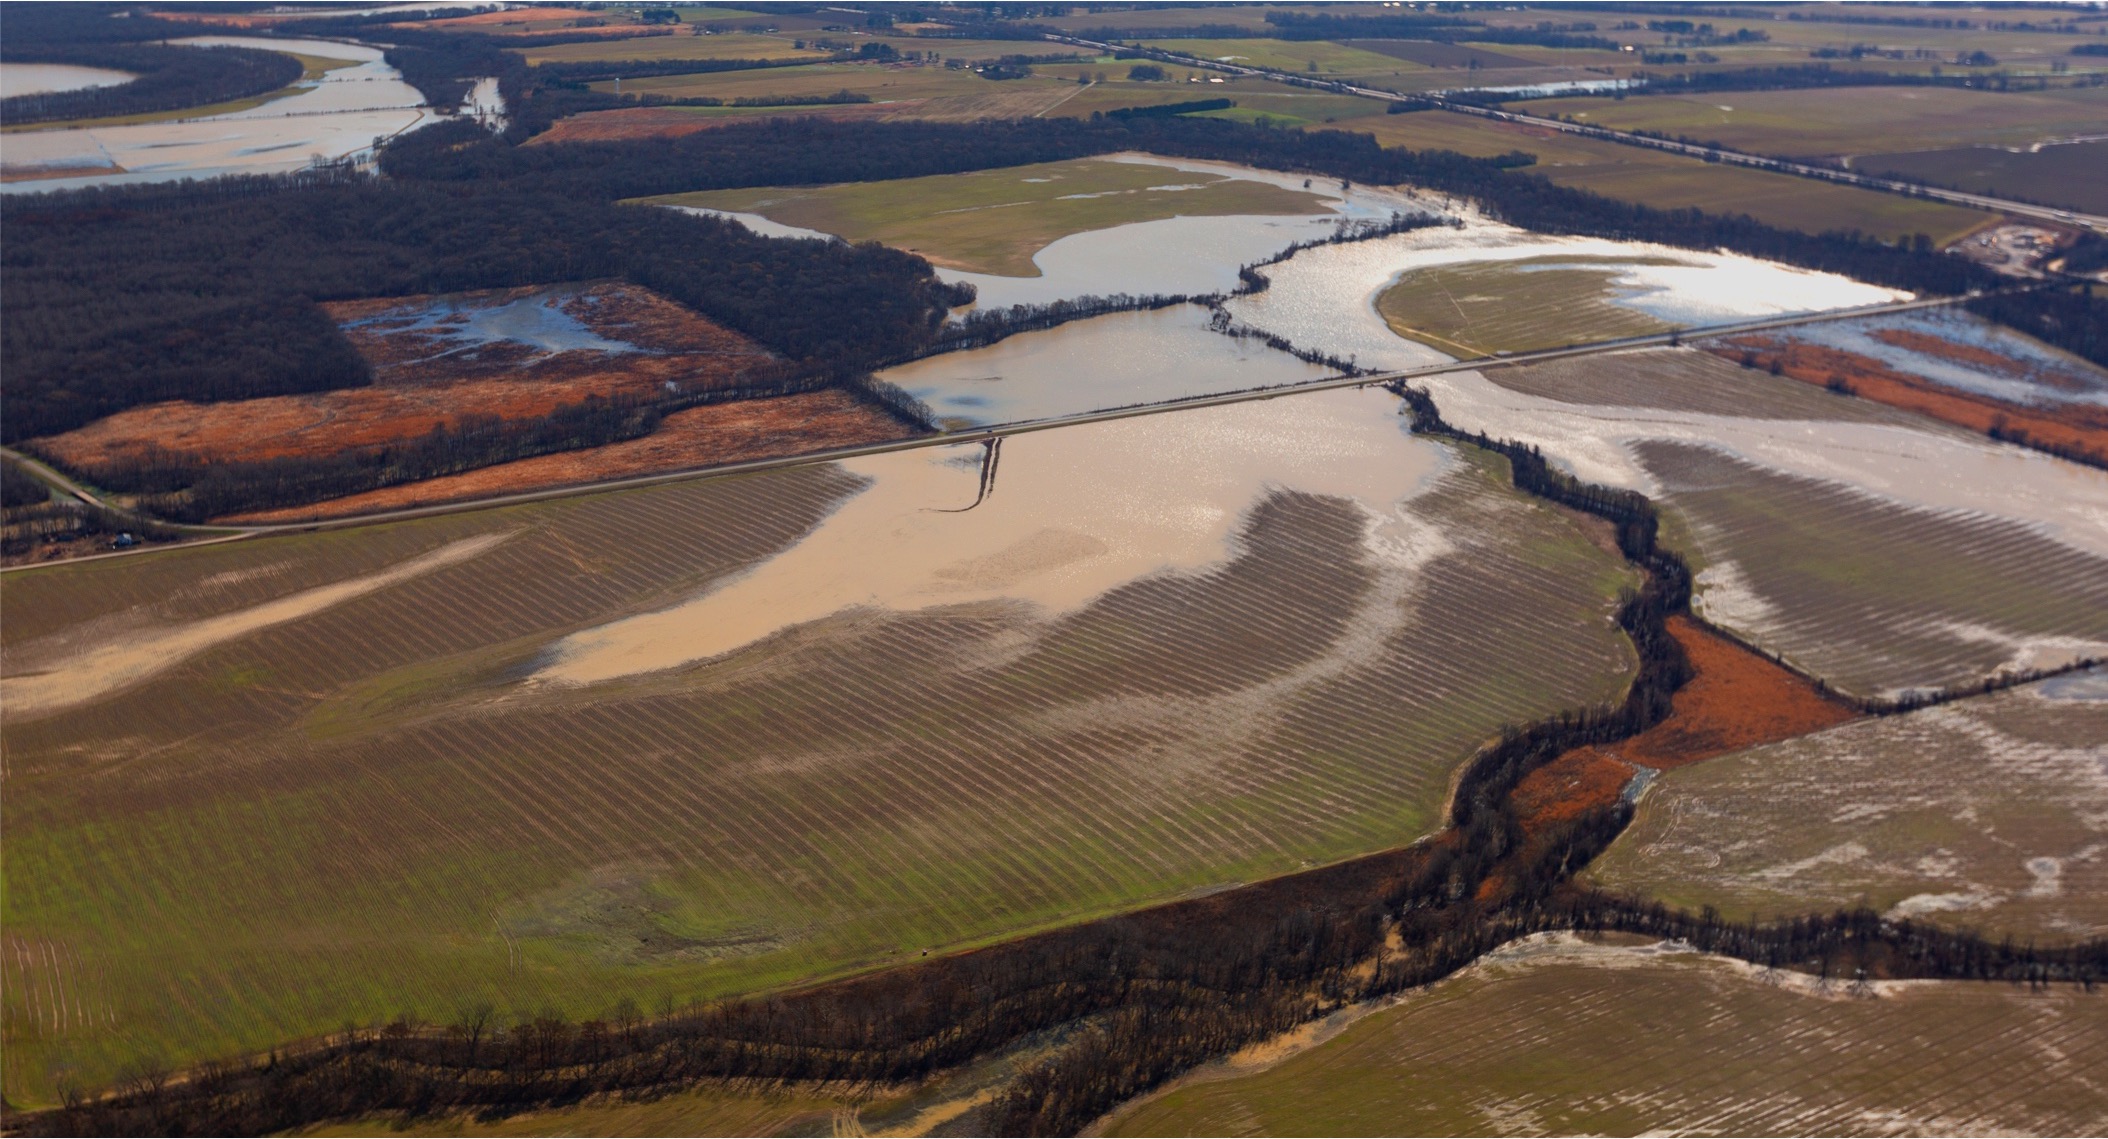 Aerial view of a large flooded area surrounded by forest.